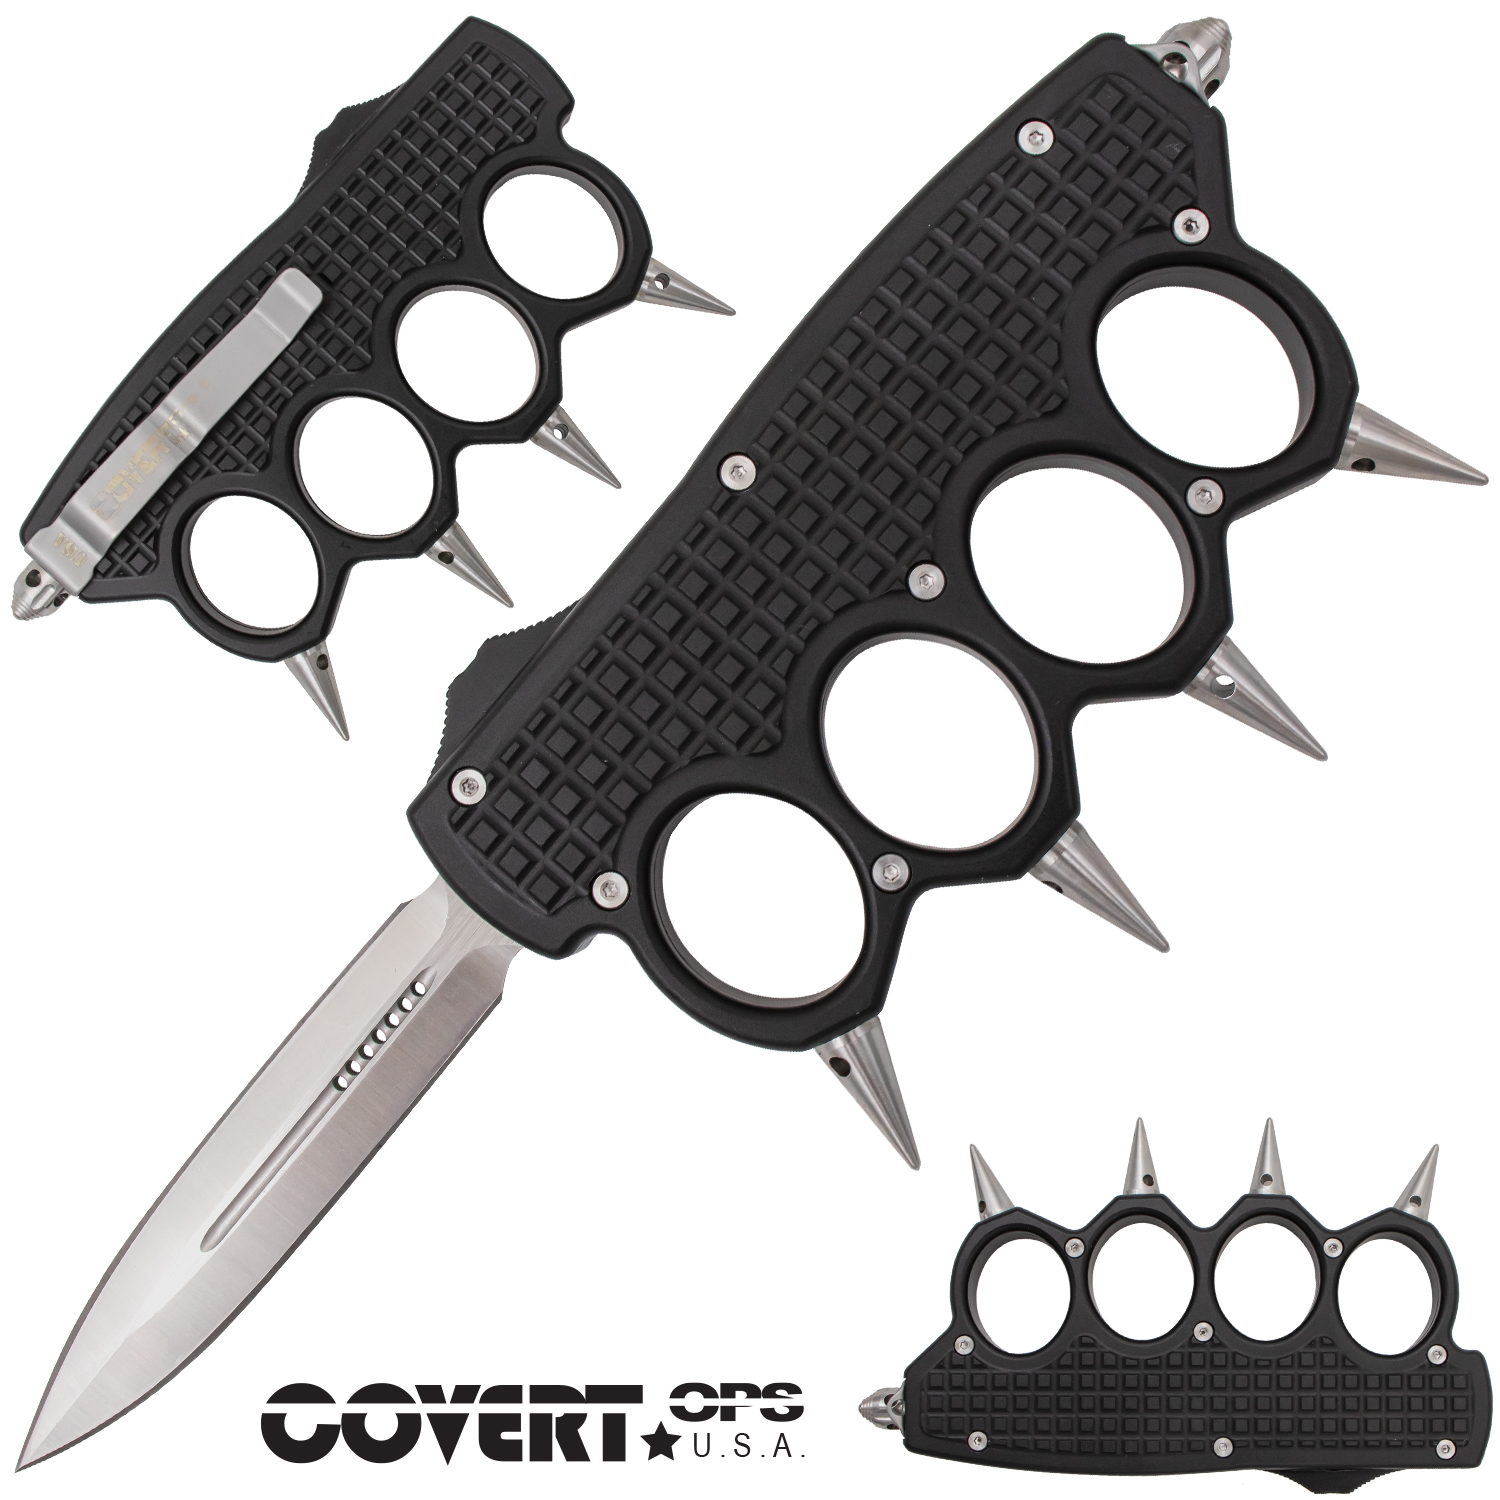 Subtle Serpent Automatic Otf Knuckle Knife With Tool And Carrying Case